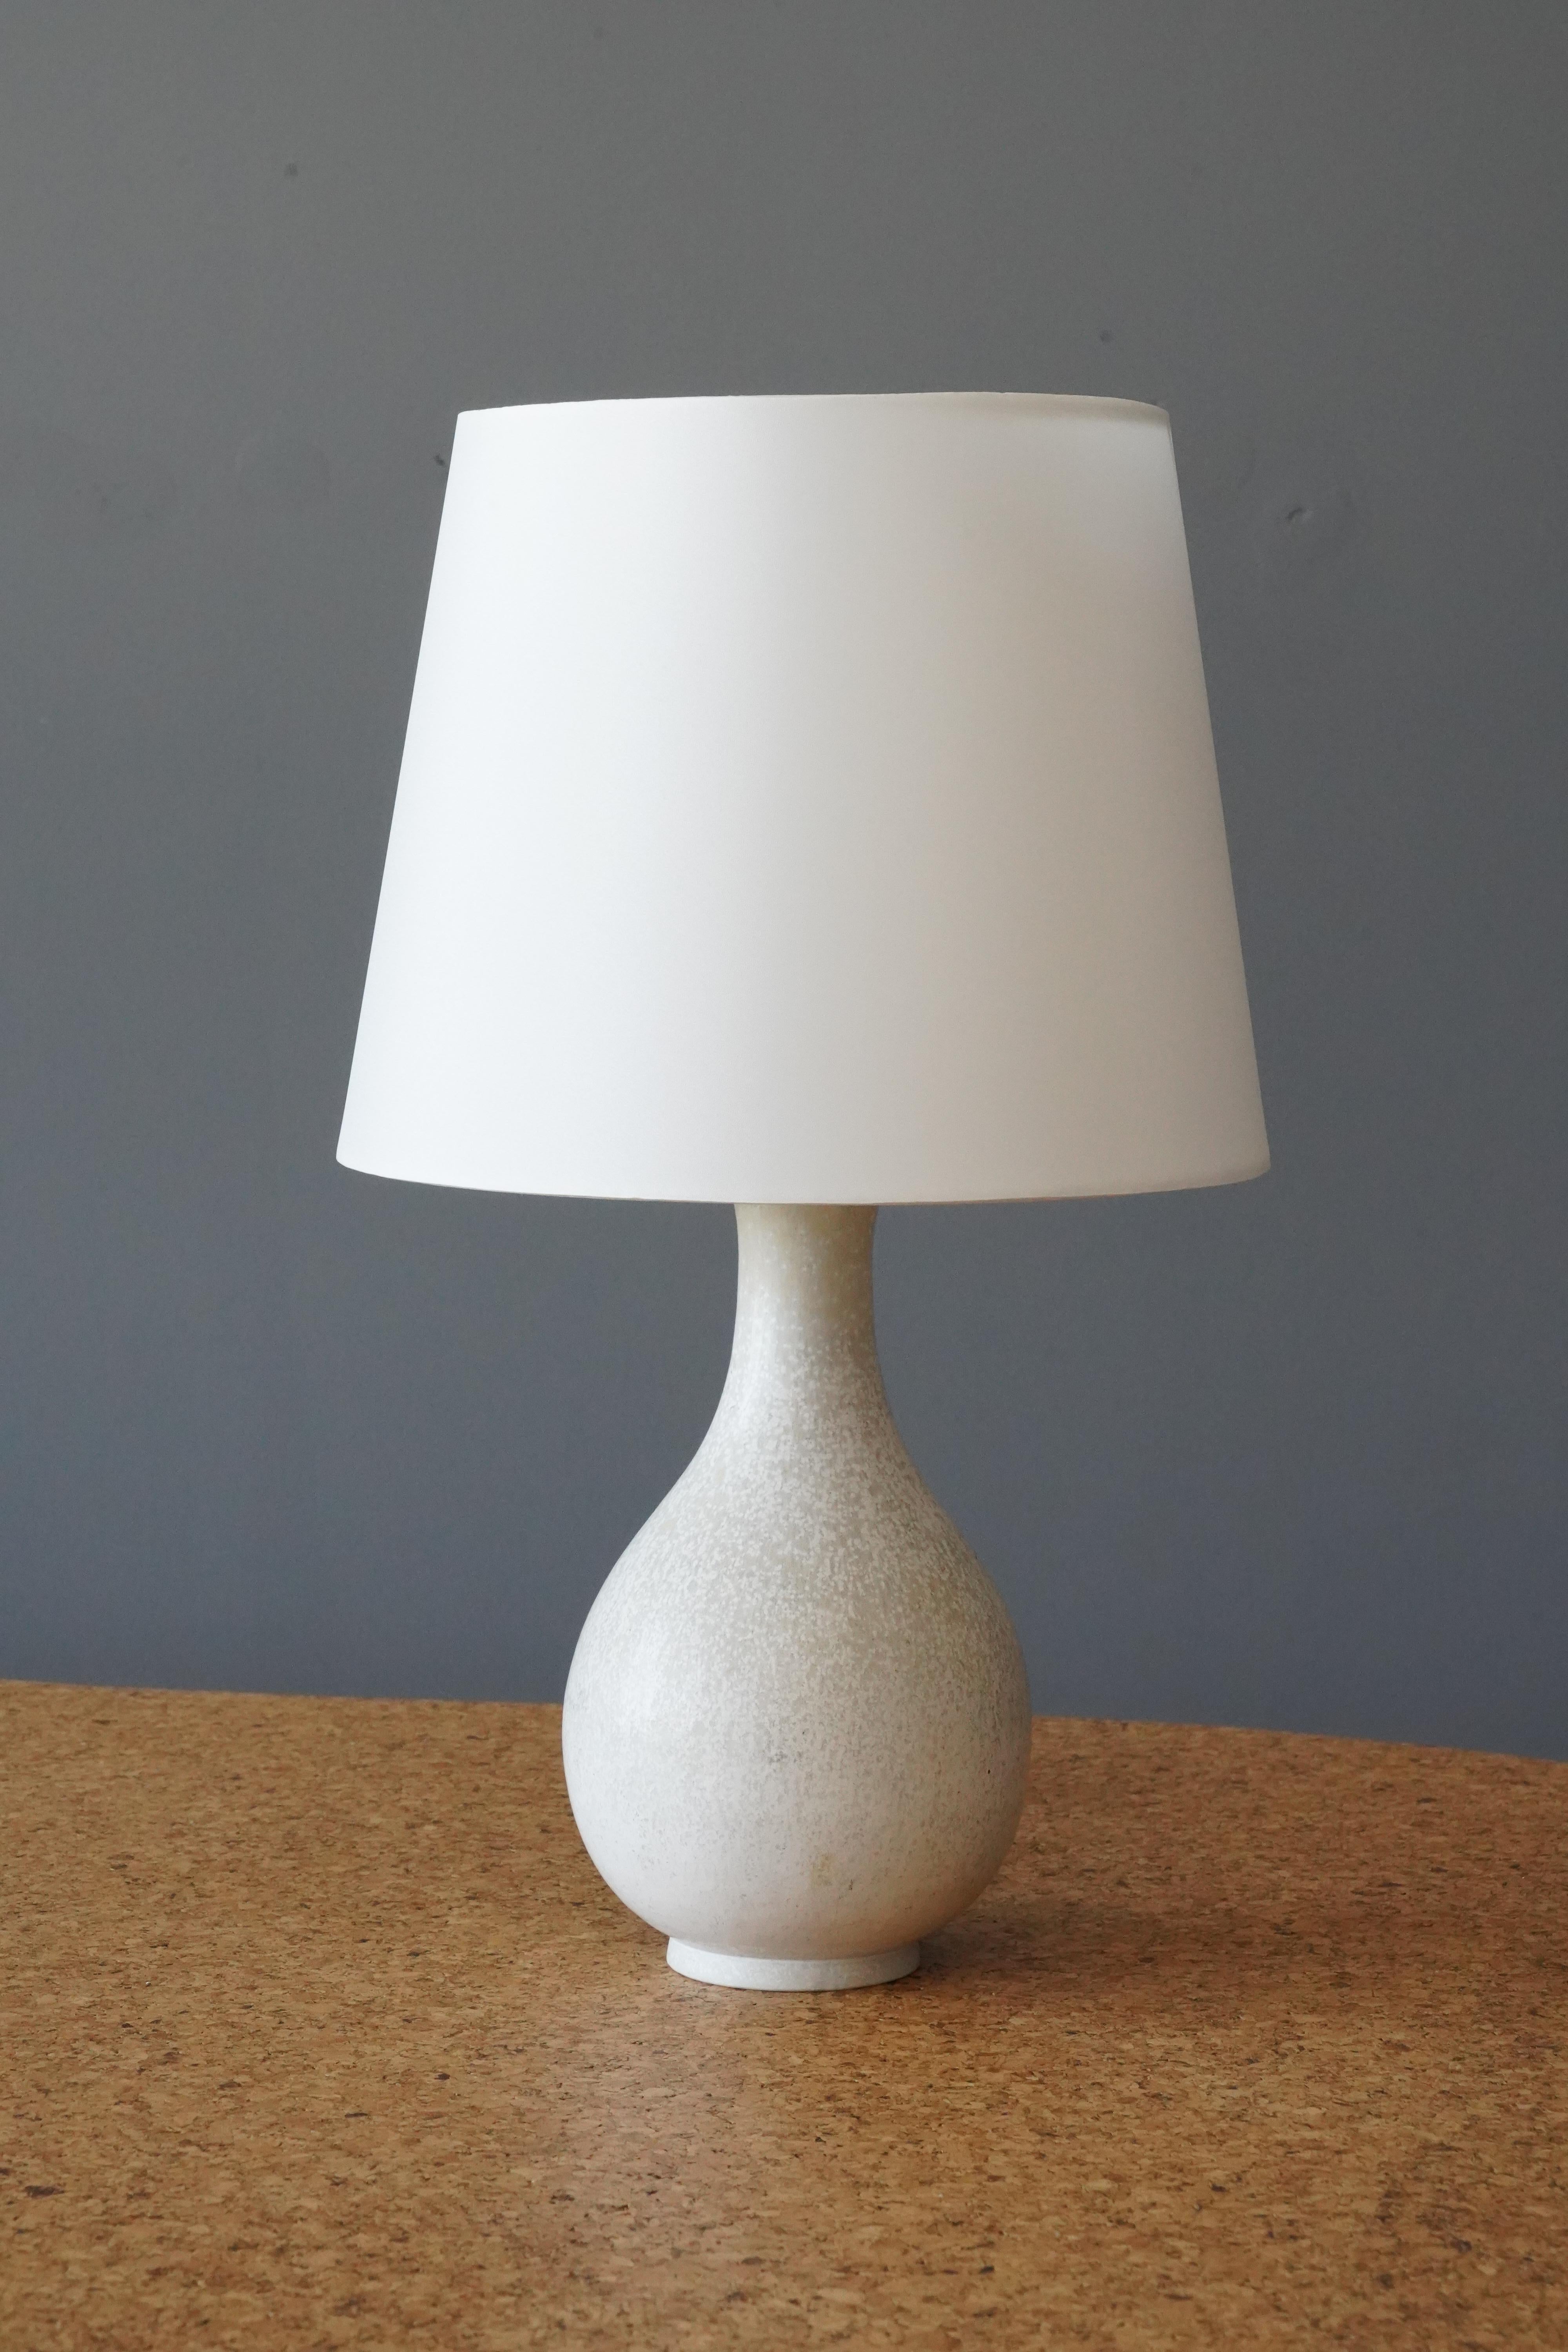 A table lamp produced by Rörstrand, Sweden, 1950s. Designed by Gunnar Nylund, (Swedish, 1914-1997). Signed. 

Stated dimensions exclude lampshade, height includes socket.  Sold without lampshade.

With the shade, it is 16.75